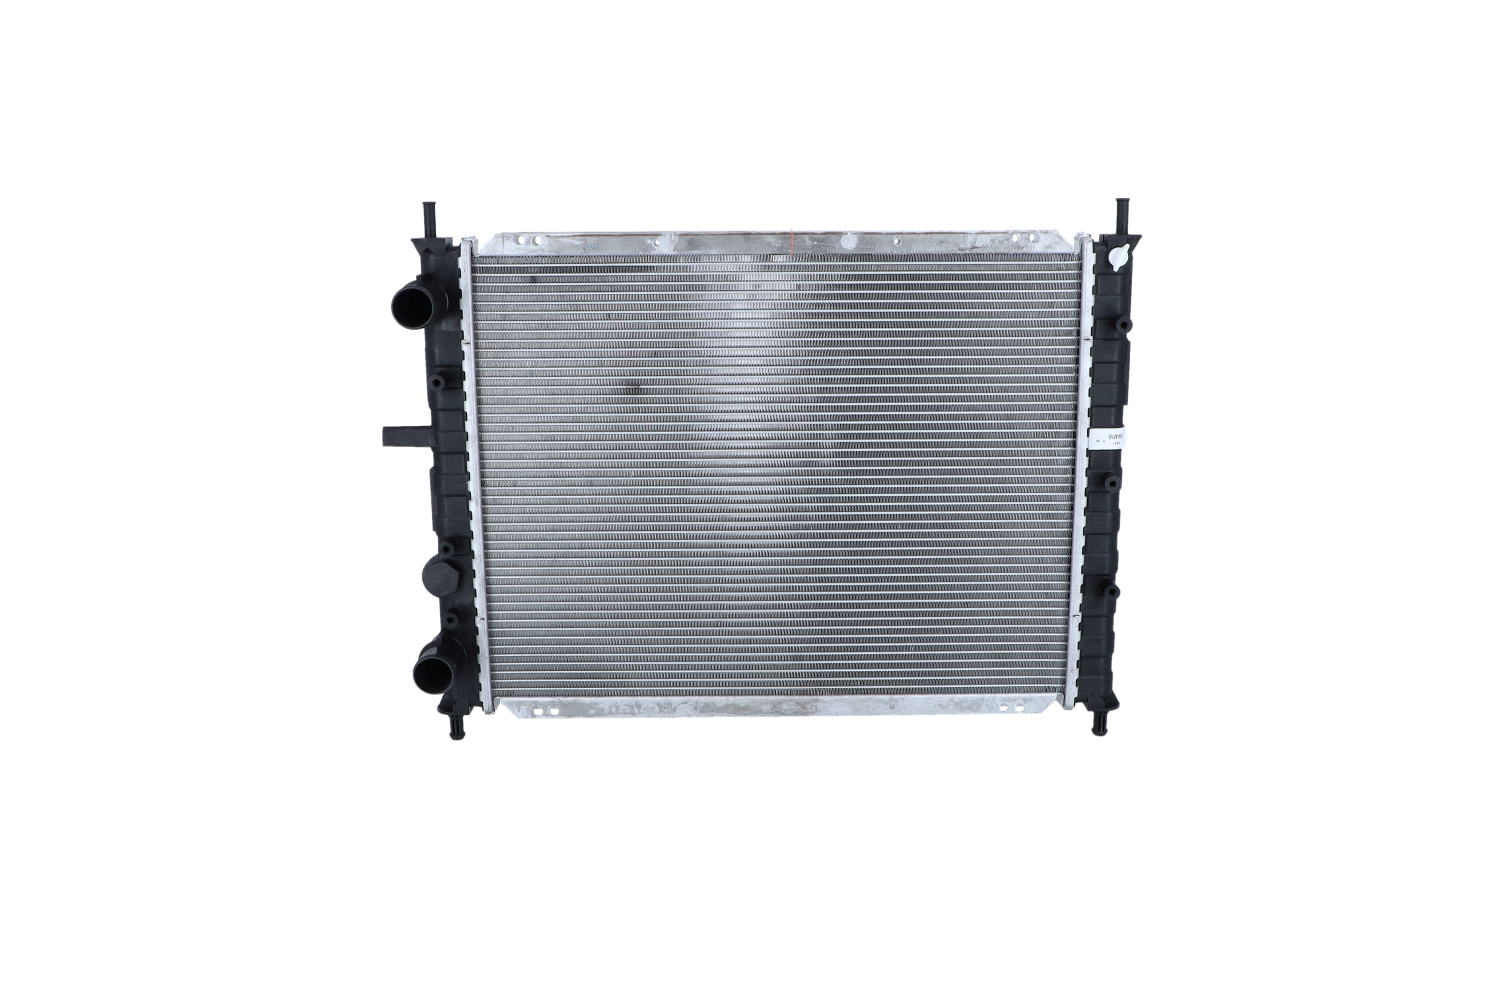 NRF 58013 Engine radiator Aluminium, 510 x 414 x 34 mm, with mounting parts, Brazed cooling fins